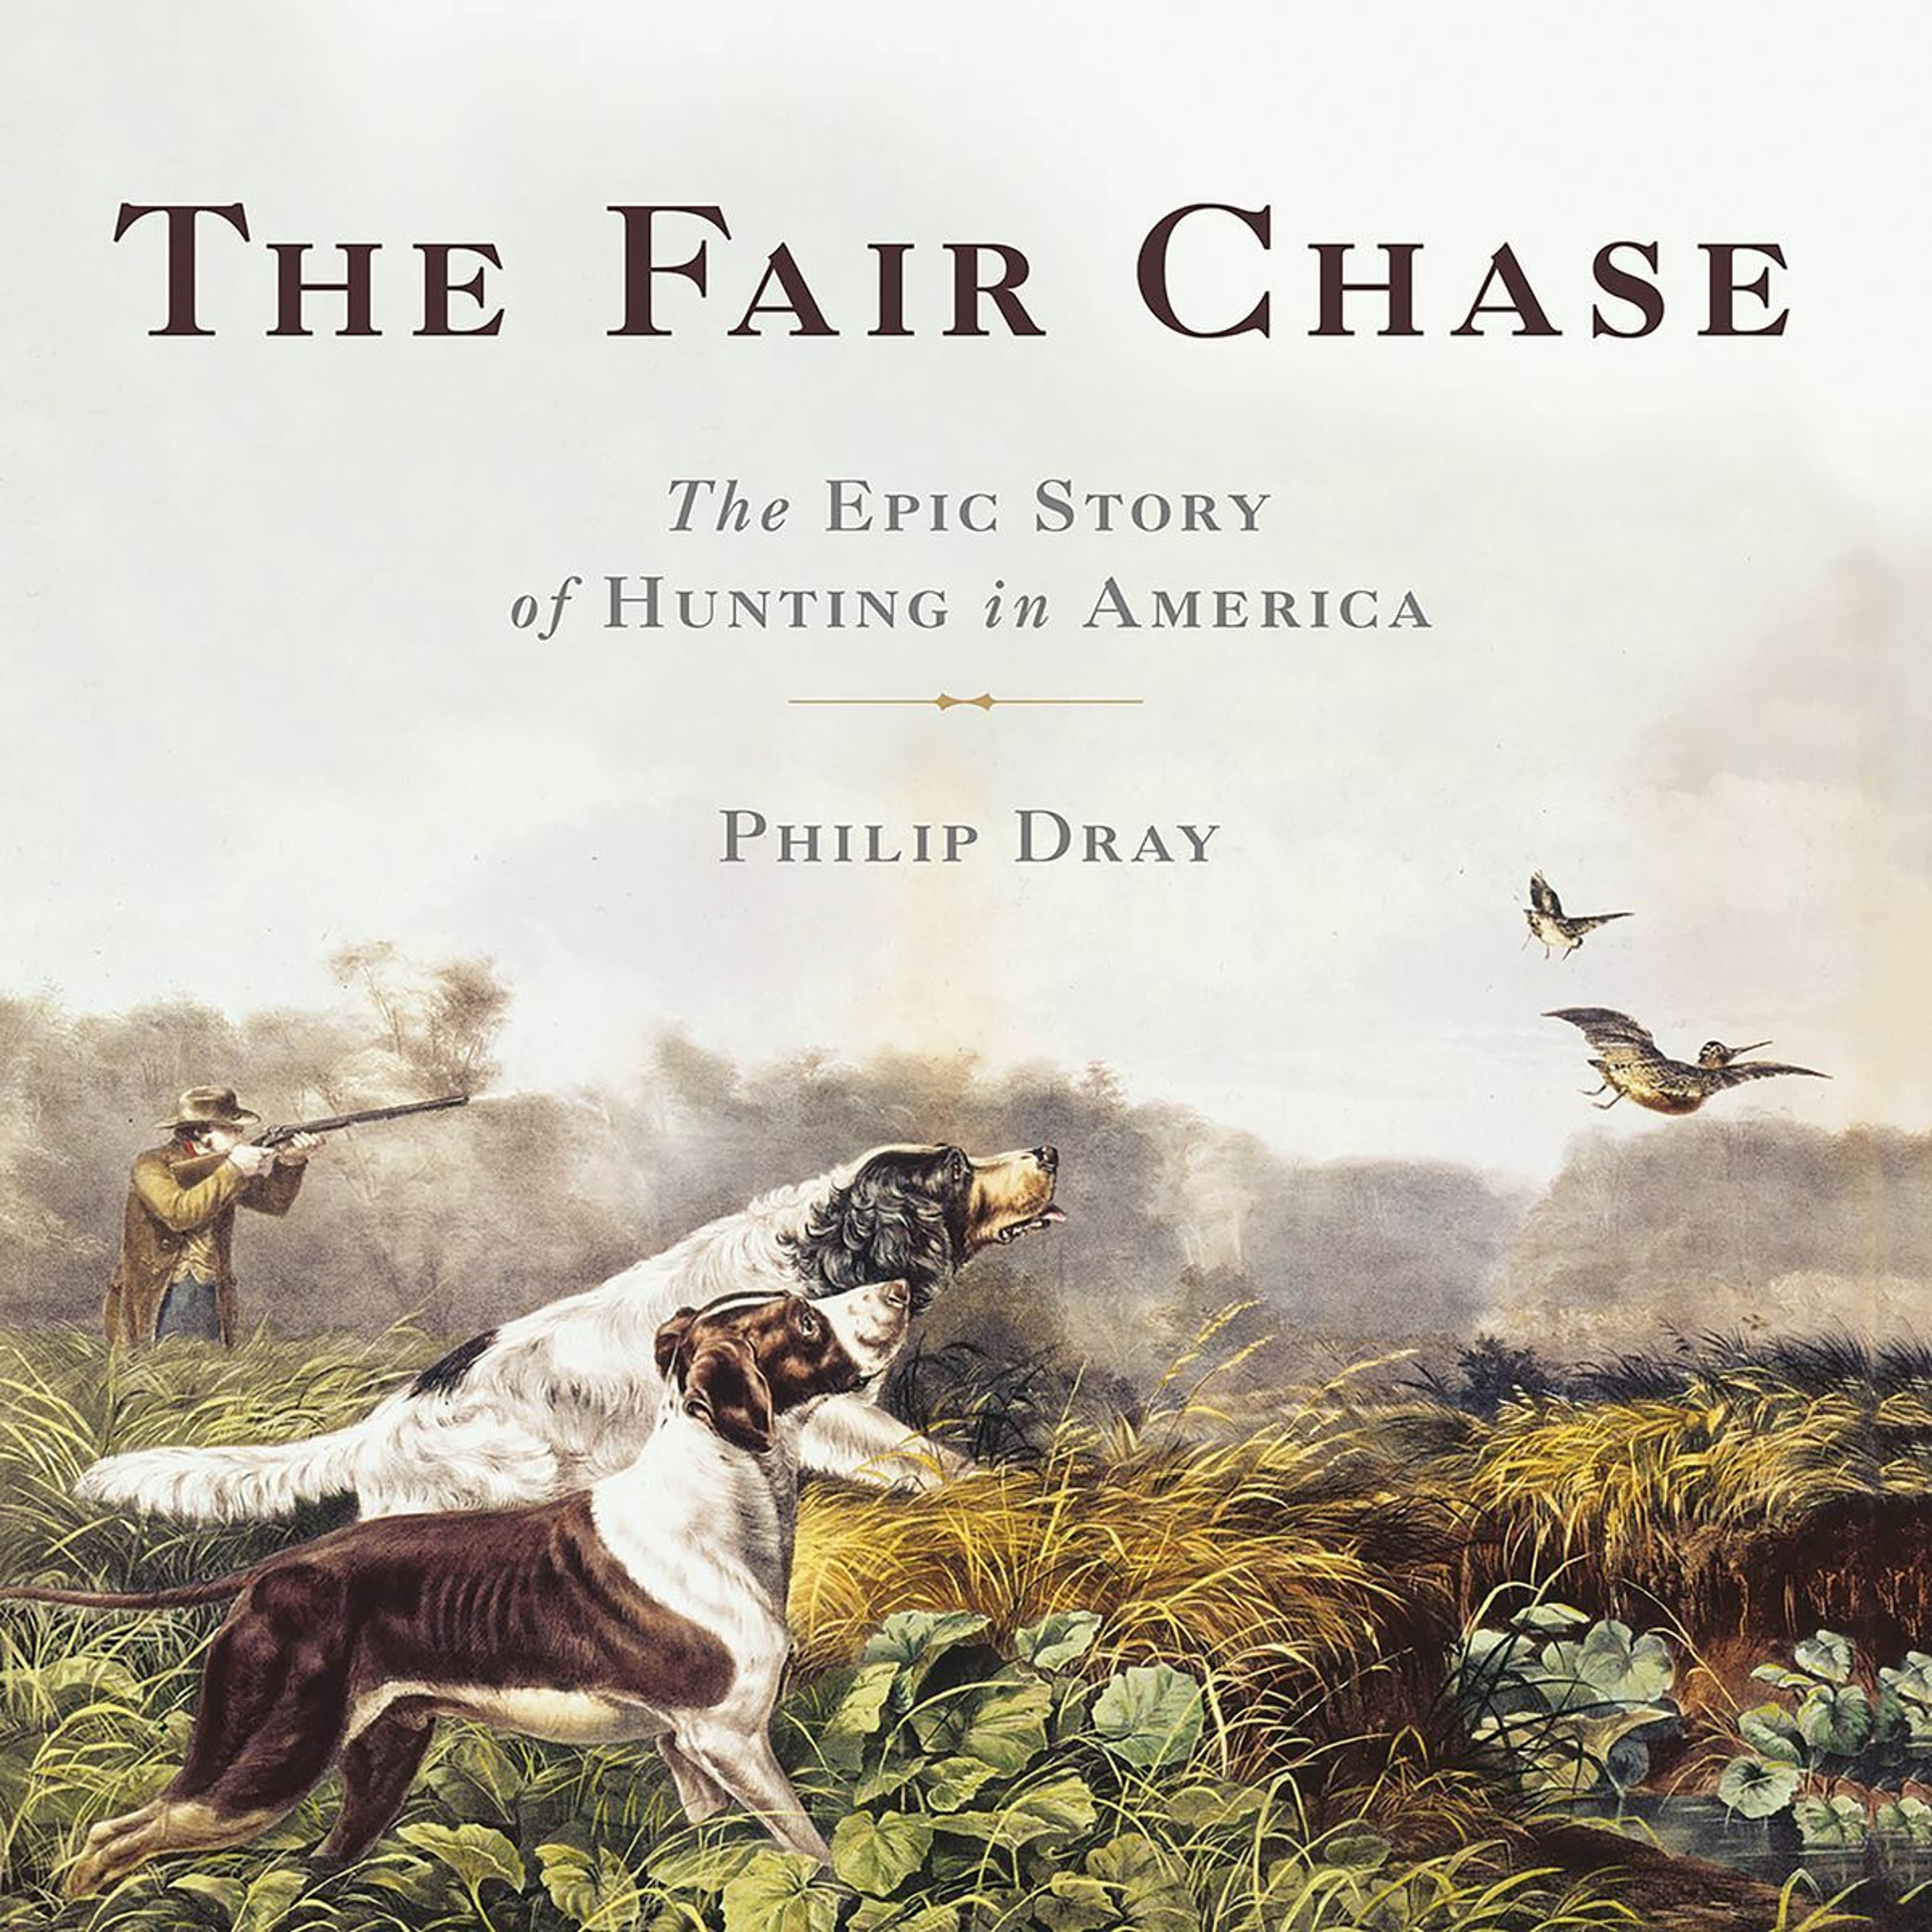 Philip Dray, “The Fair Chase: The Epic Story of Hunting in America”